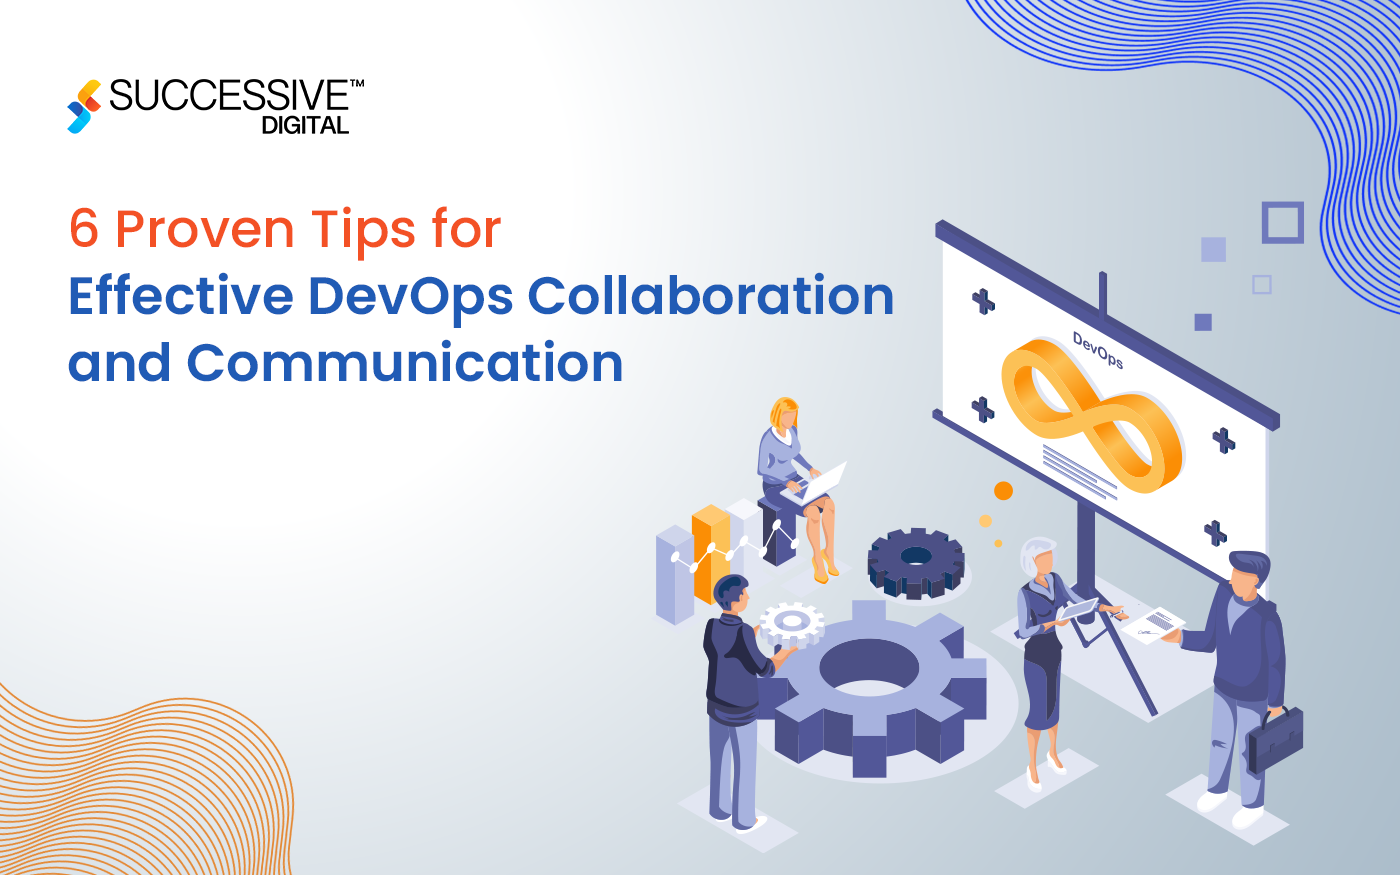 6 Proven Tips for Effective DevOps Collaboration and Communication